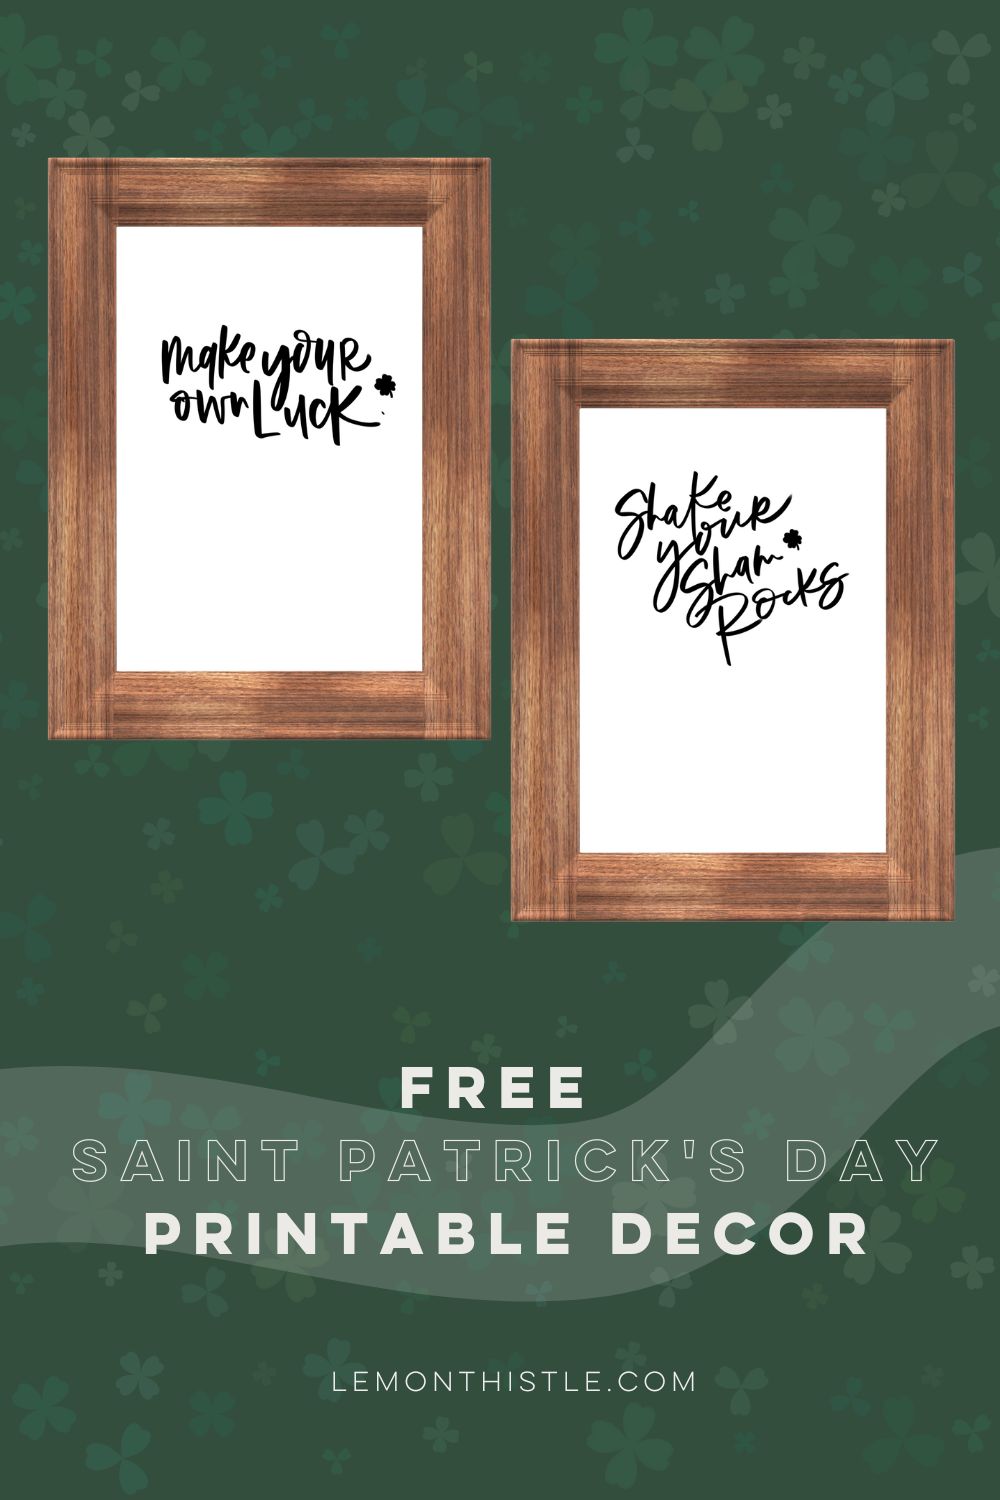 two images of printable wall art, one reads 'shake your shamrocks' and one reads 'make your own luck' both with small shamrocks. text over images reads: handlettered saint patricks day free printables